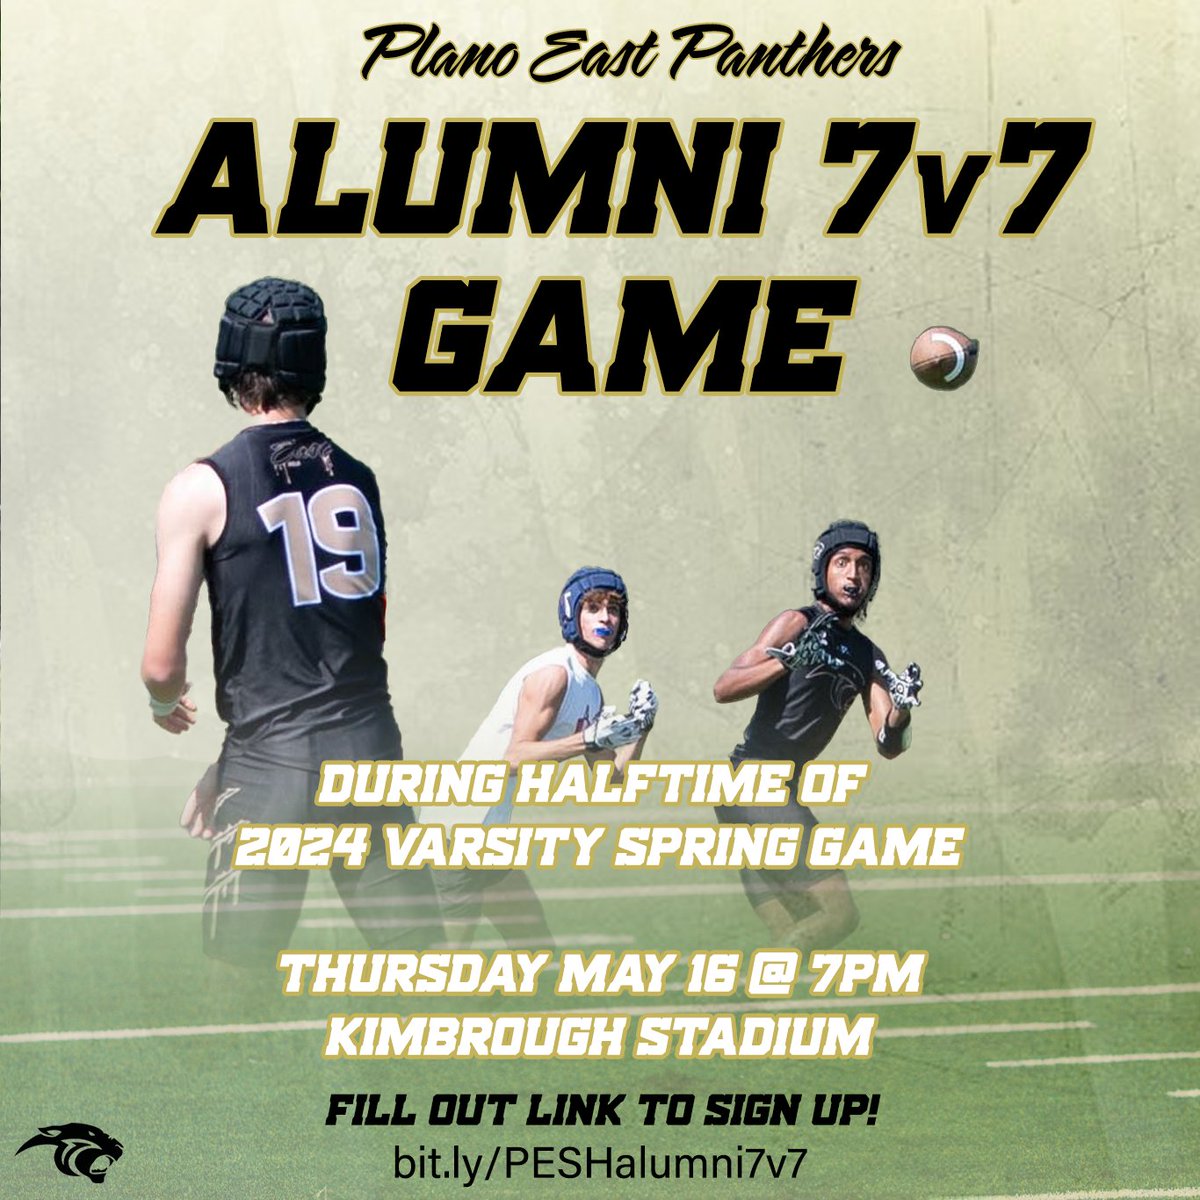 ‼️📢 PESH ALUMNI INVITED📢‼️

During halftime of our upcoming Spring Game, we will hold 7v7 Game and to sign up, click the link below. Share with your former teammates as well!

bit.ly/PESHalumni7v7

#EastsidePride #GoldBlooded